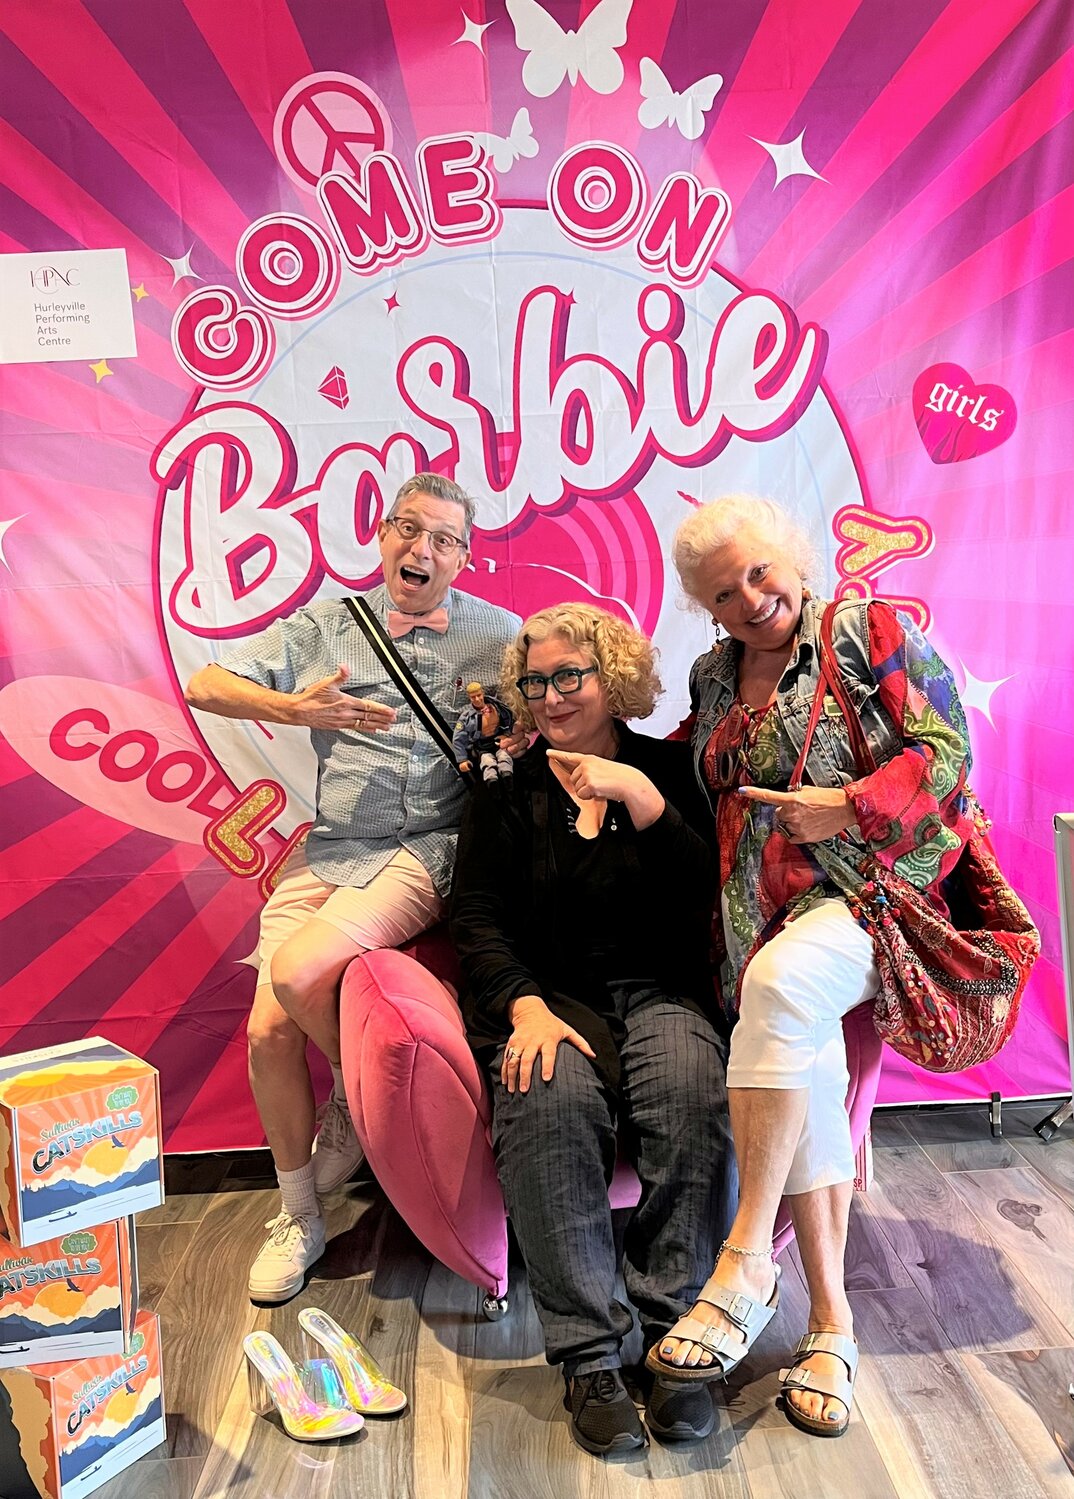 I met up with friends Sabrina Artel, center, and date-mate Rachelle Carmack for a glittery, sparkly good time at a screening of the smash hit film "Barbie" in Hurleyville, NY last weekend.